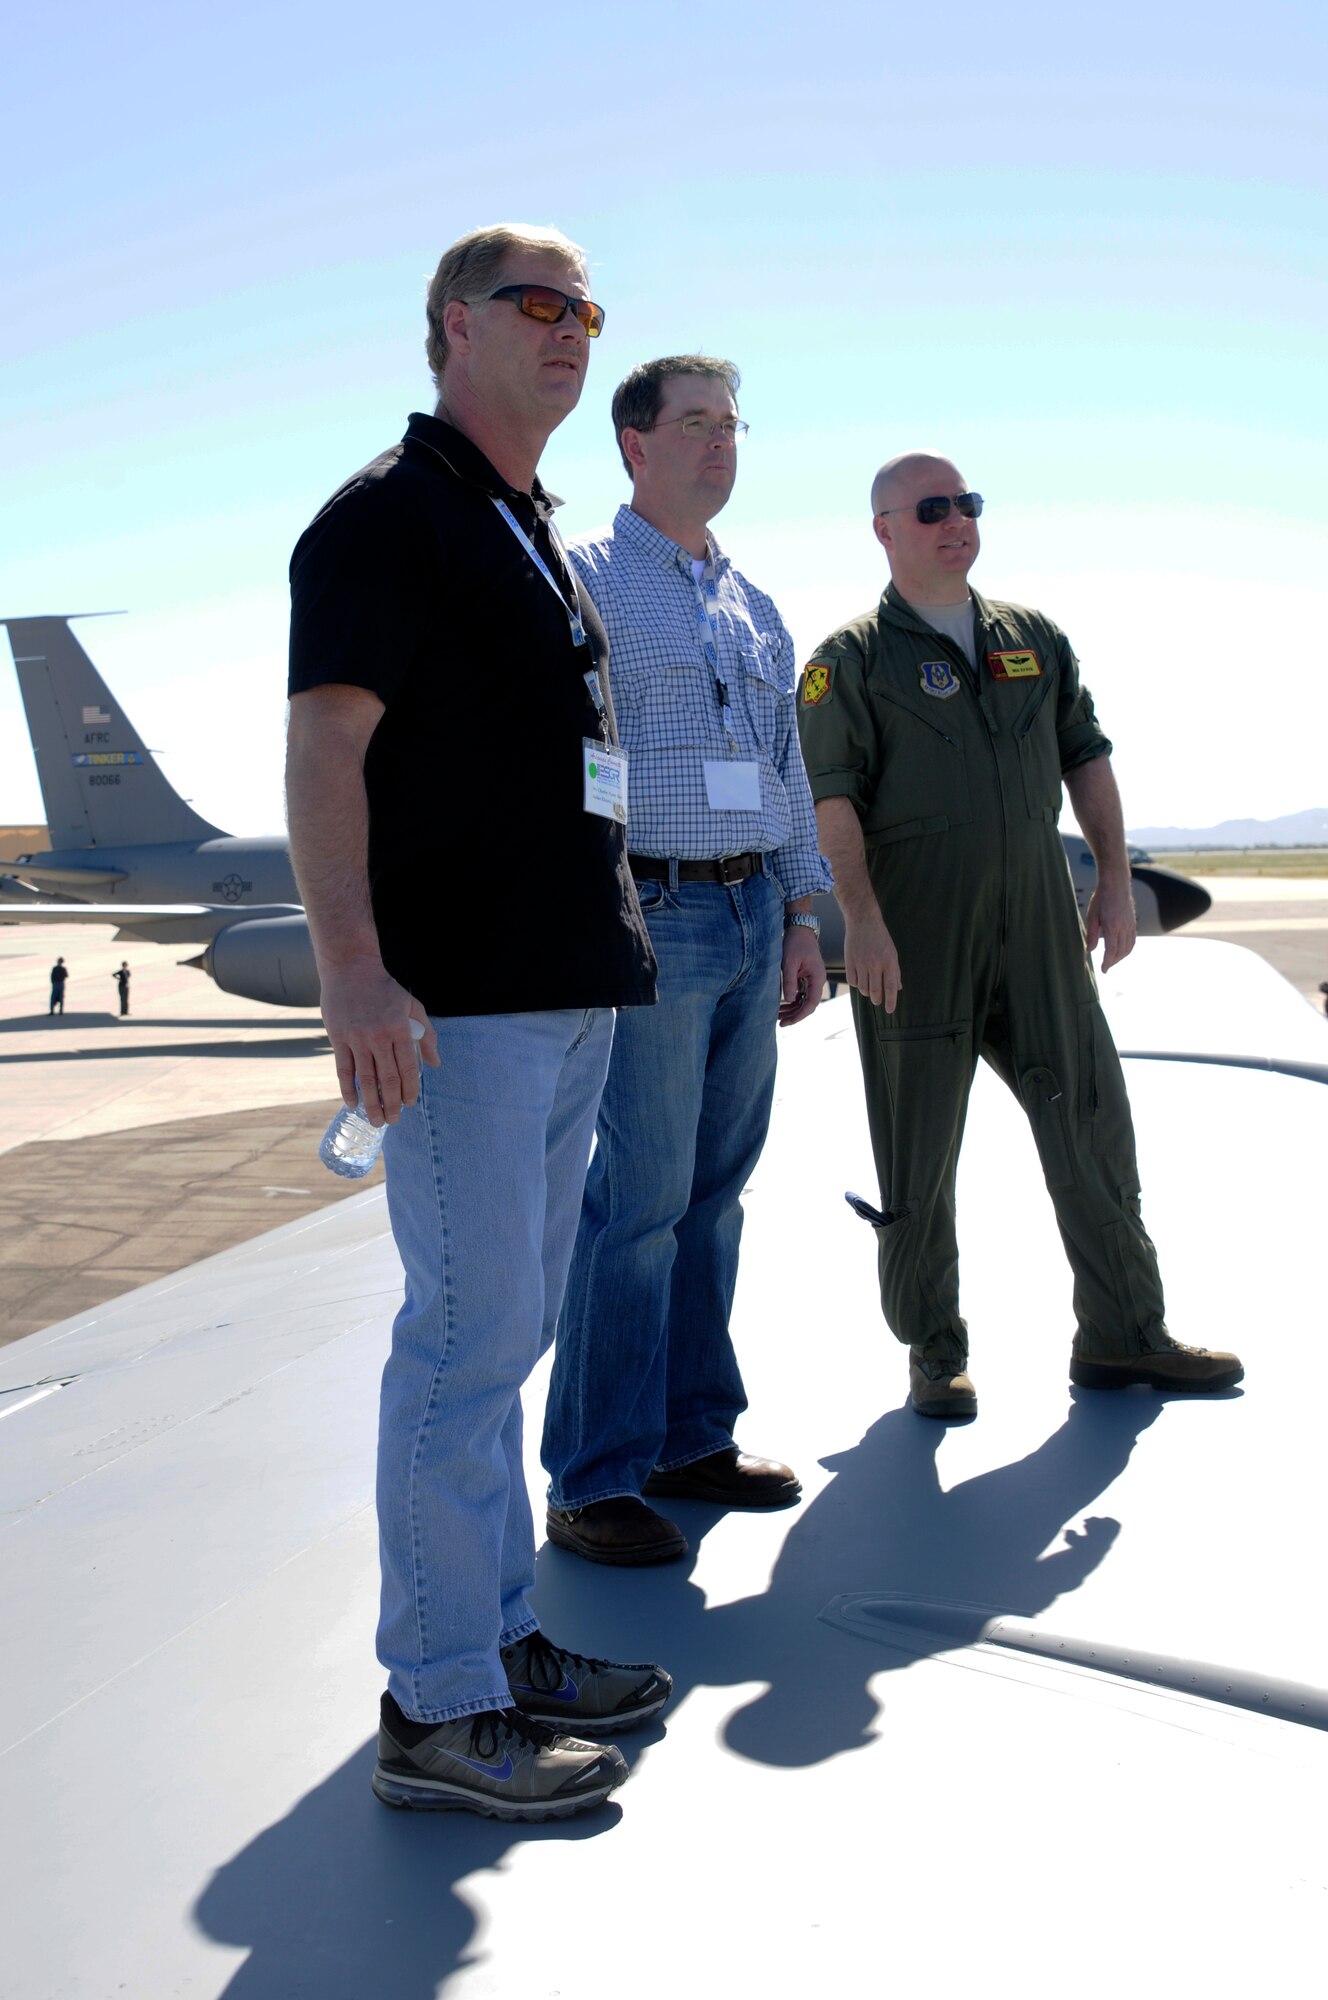 Maj. Ben Evans, right, a KC-135 Stratotanker pilot with the 507th Air Wing of the Air Force Reserves based at Tinker Air Force Base, Okla., stands on the wing of a KC-135 alongside civilian employers. The trio watch as A-10C Thunderbolt II "Warthogs" takeoff during a 188th Fighter Wing ESGR event at Davis-Monthan Air Force Base, Ariz. More than 40 local employers visited the Arkansas Air National Guard’s 188th Fighter Wing at Davis-Monthan AFB Feb. 22-23 to watch the Flying Razorbacks and their A-10s participate in Operation Snowbird, a combat rehearsal for the unit’s deployment to Afghanistan this summer in support of Operation Enduring Freedom. The event was part of an Employer Support for the Guard and Reserve (ESGR) trip. The objective was to give employers a better understanding of how vital the Guardsmen they employ are to the mission and how they each play a key role in the unit’s success. (National Guard photo by Maj. Heath Allen/188th Fighter Wing Public Affairs)